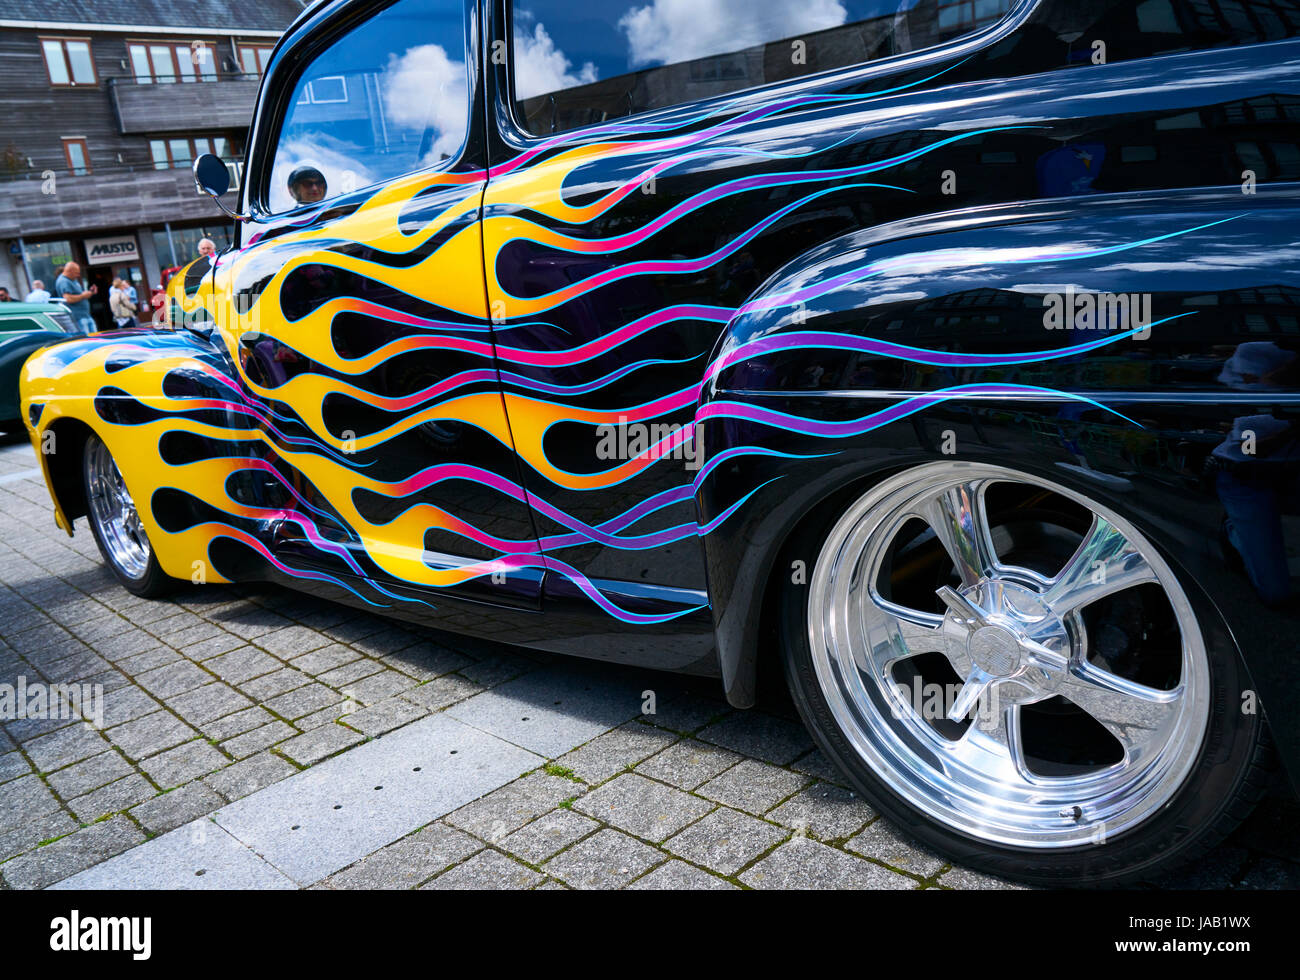 Hot Rod' type of customised car with bright paint work and special details  Stock Photo - Alamy